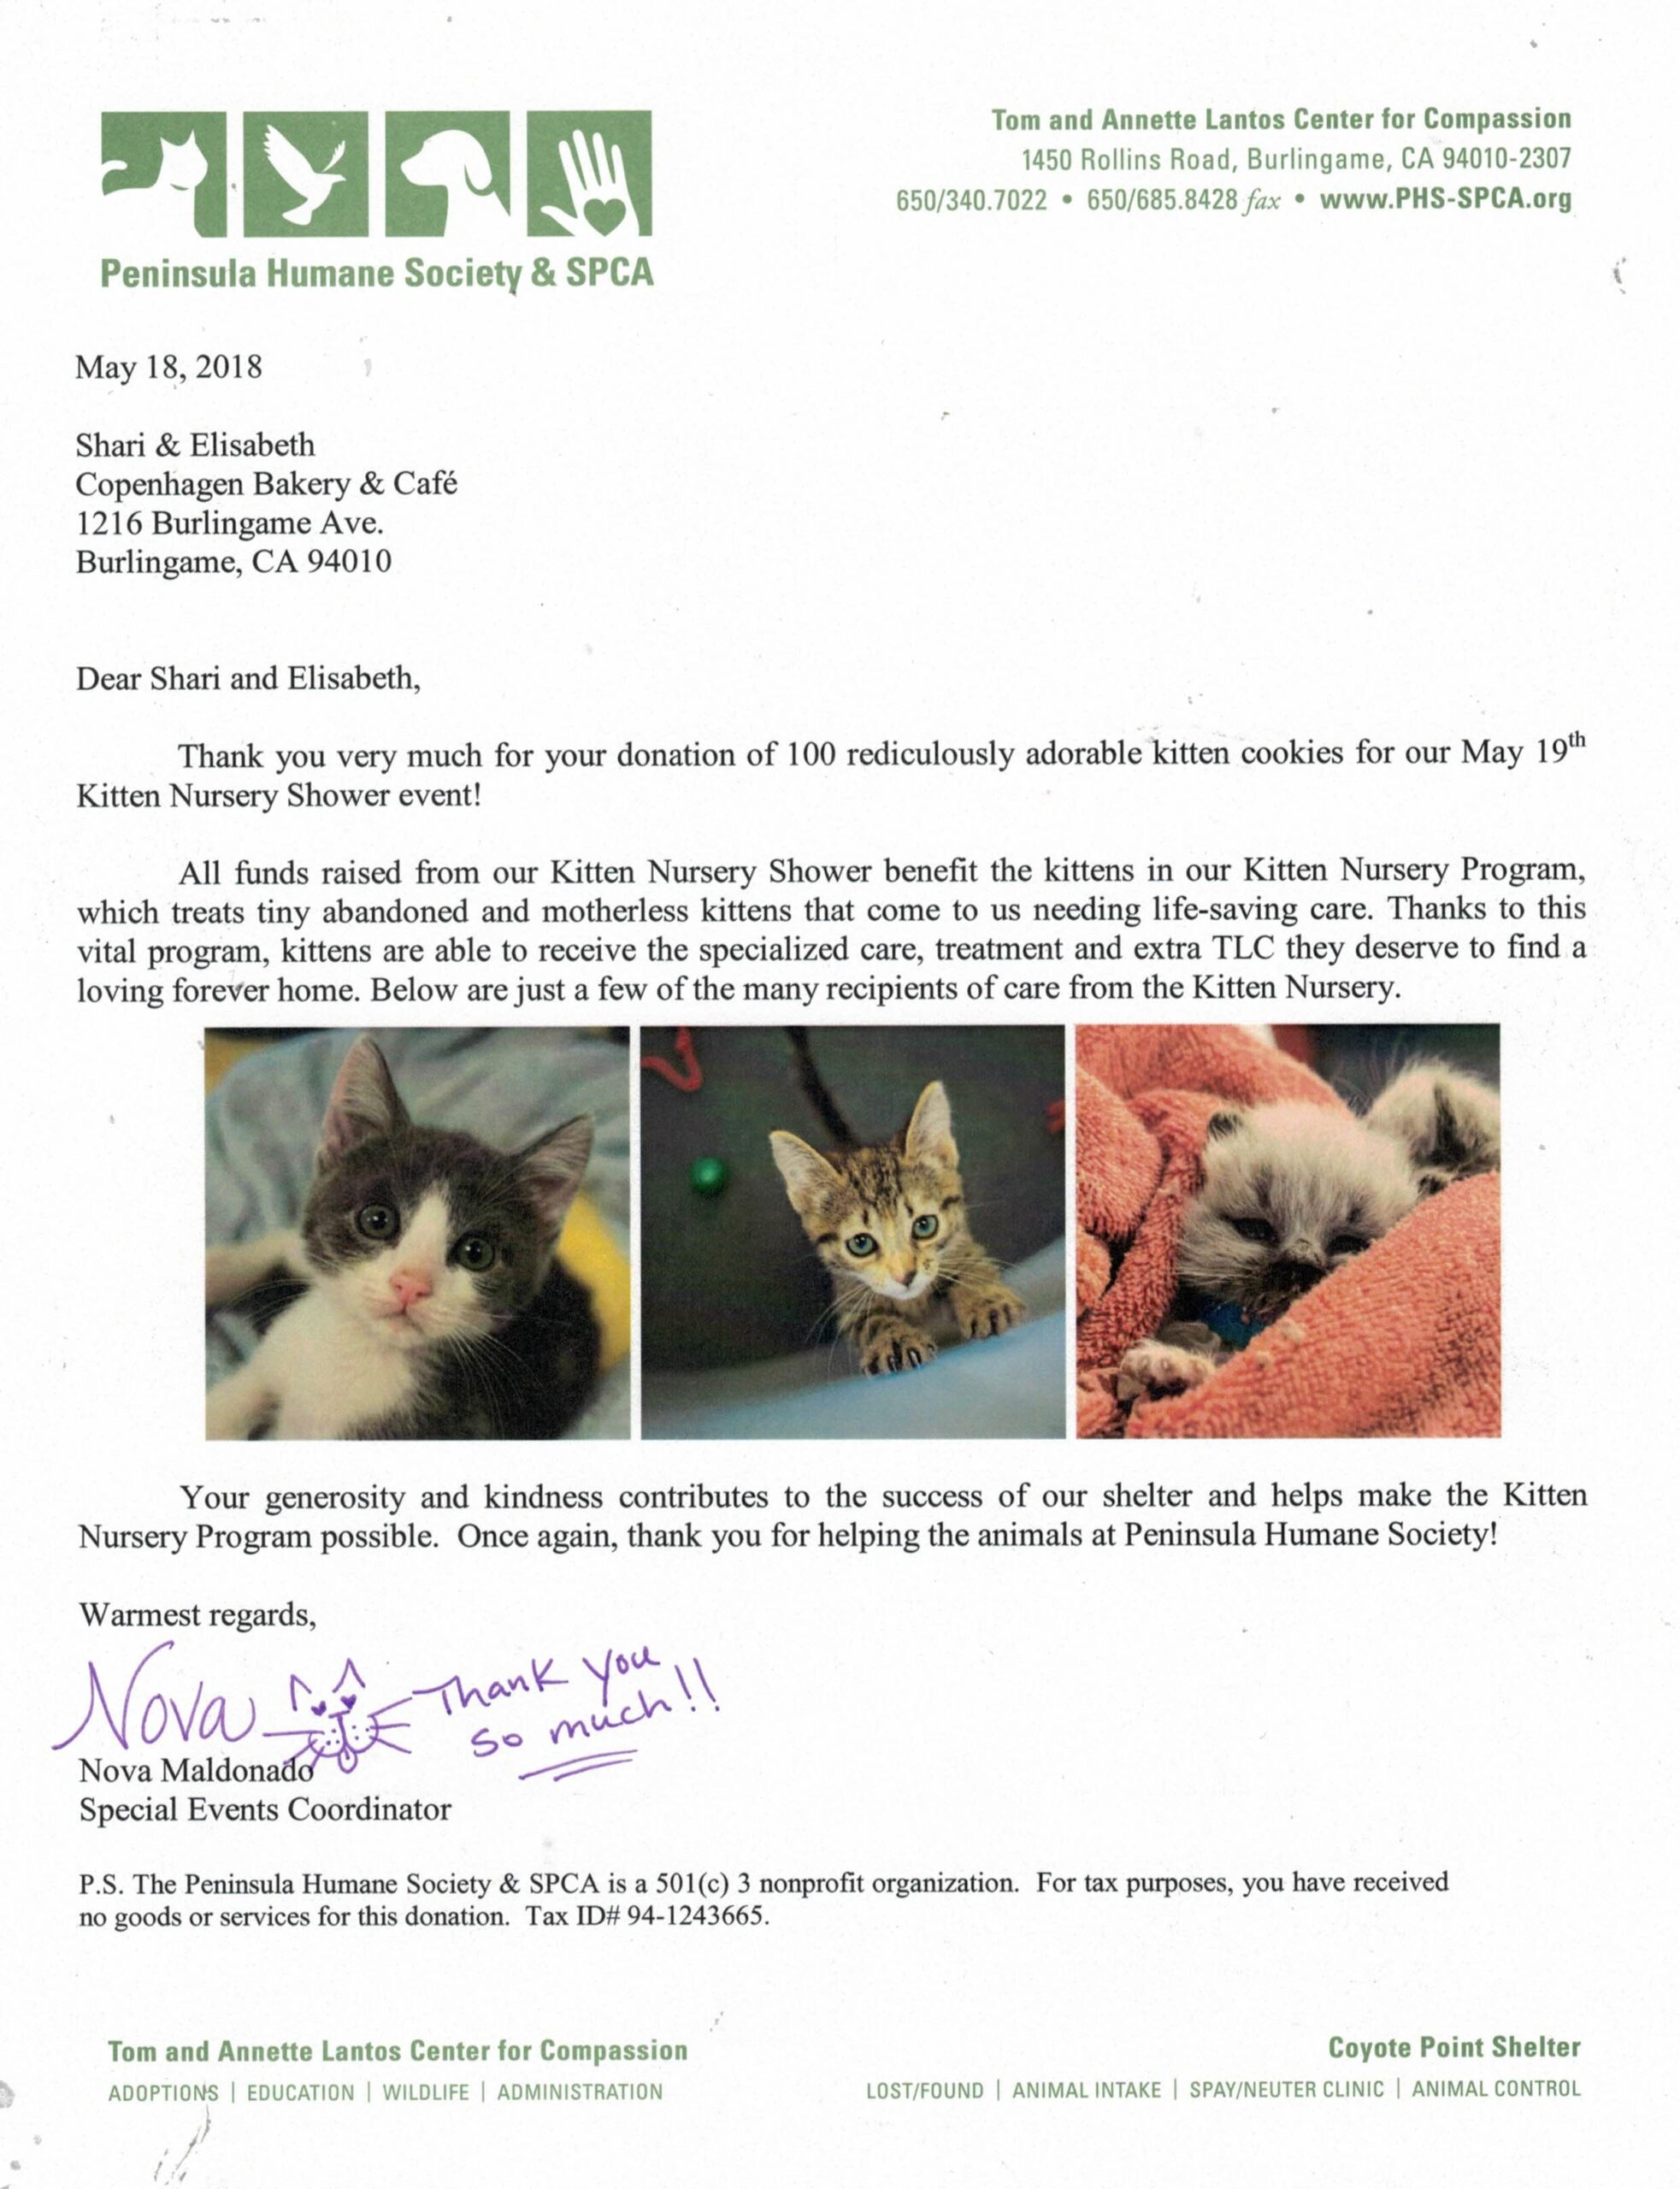 Cutest thank you letter from the Peninsula Humane Society.